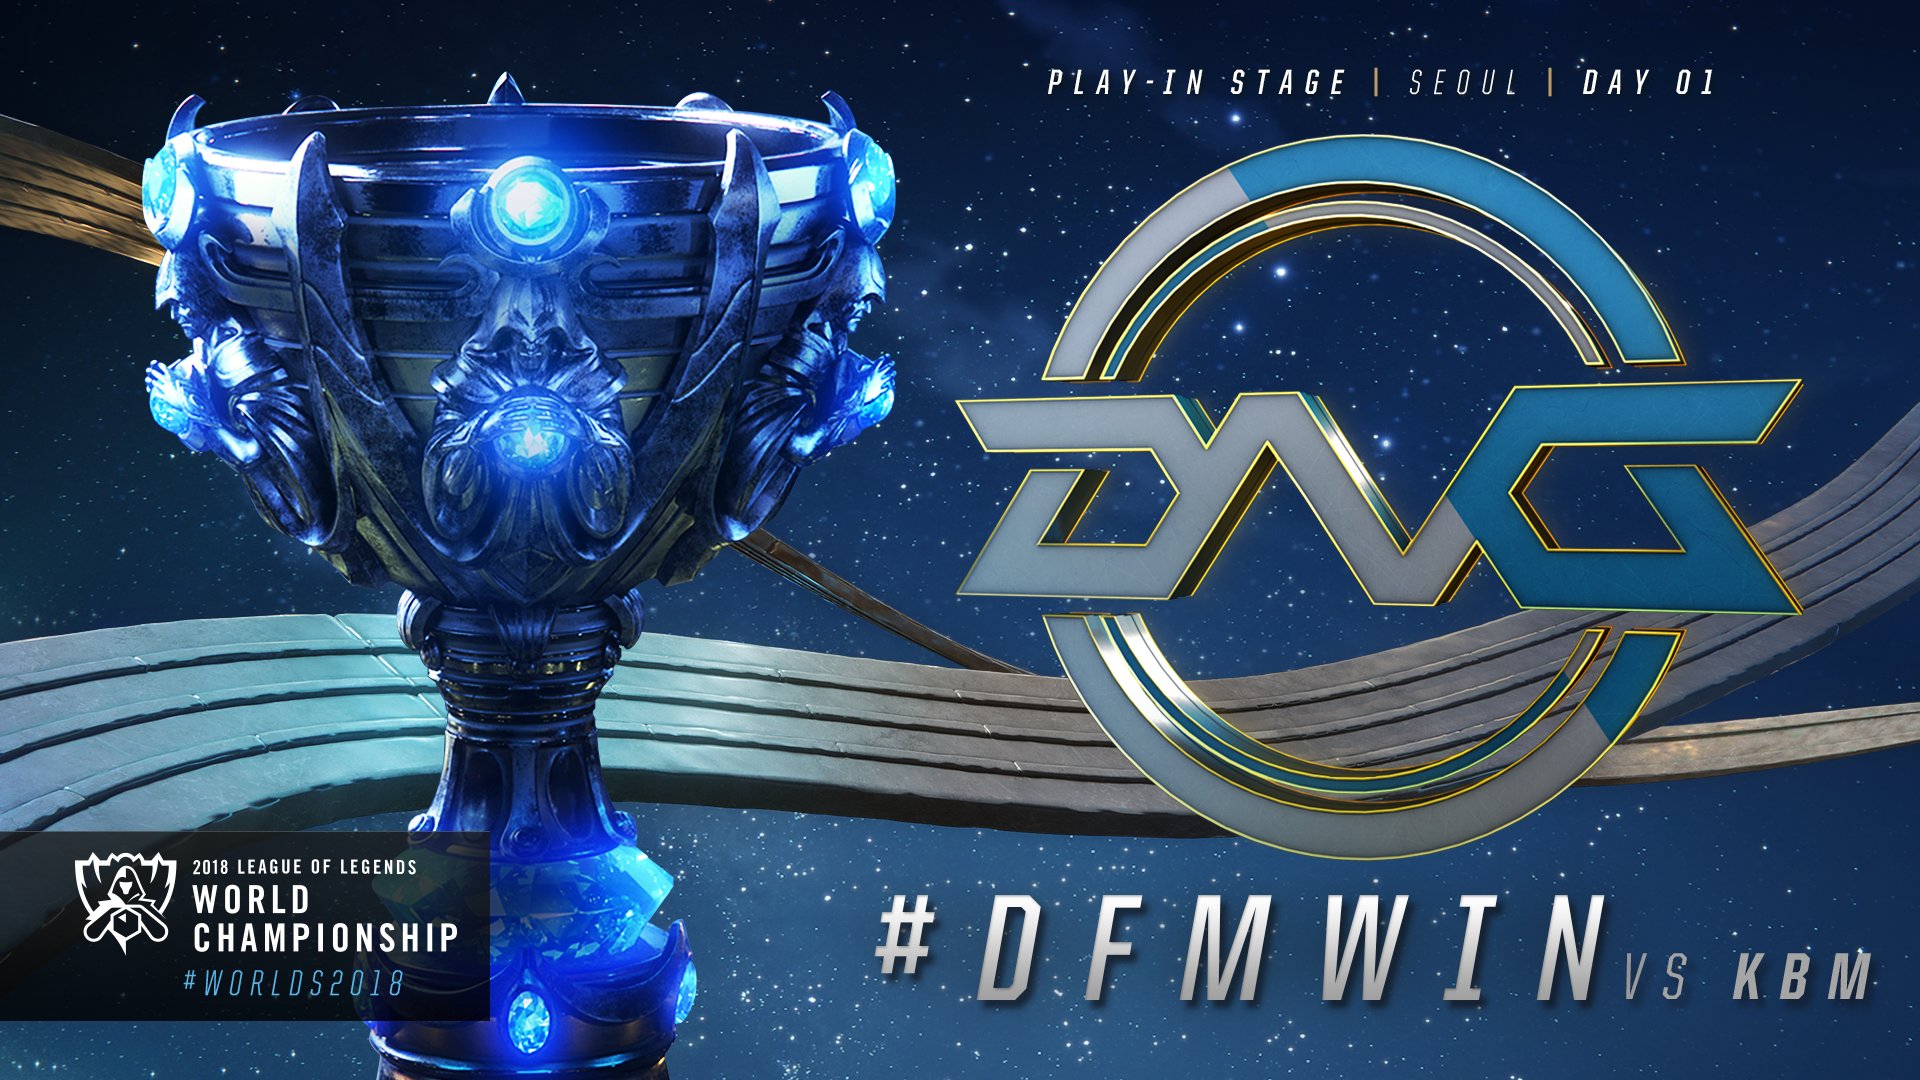 LoL Esports on Twitter: What a way to kick off #Worlds2018 for  @team_detonation as they take down @KaBuMESports! #DFMWIN   / Twitter